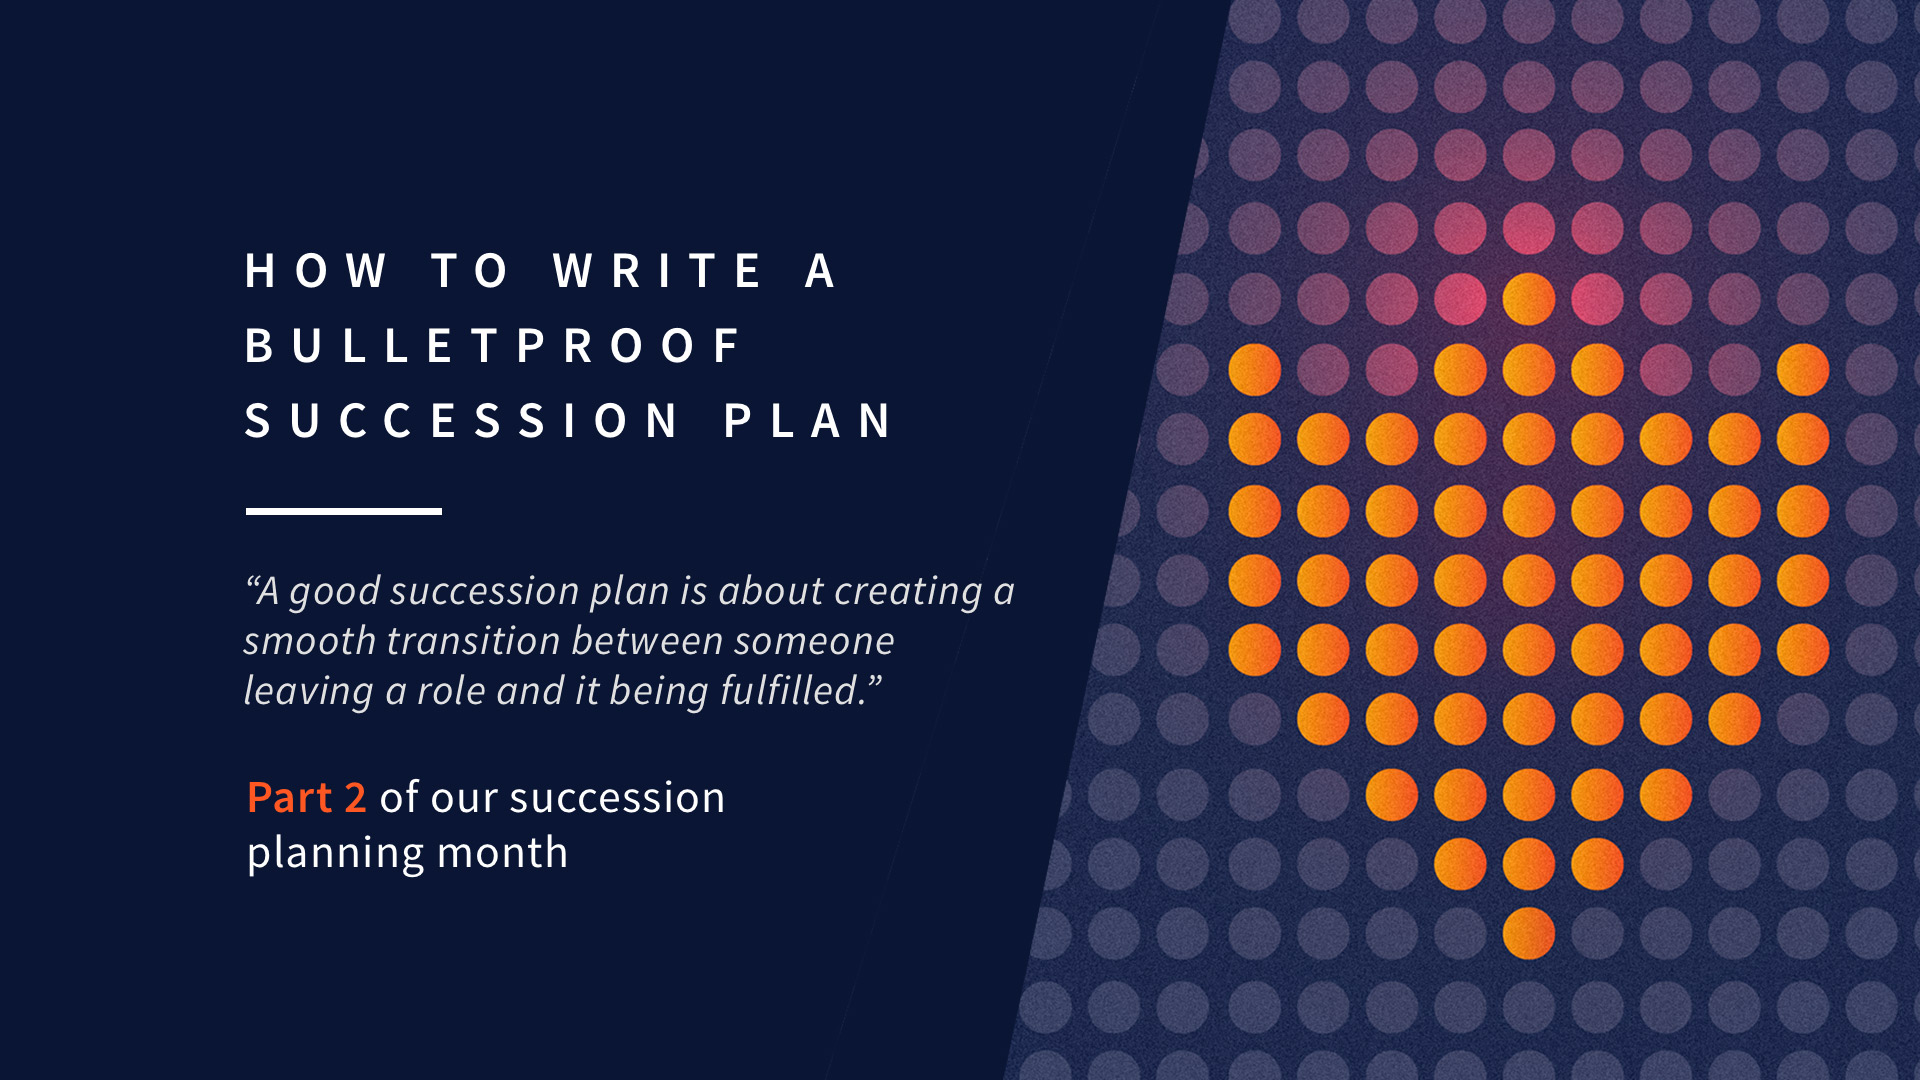 How to write a bulletproof succession plan